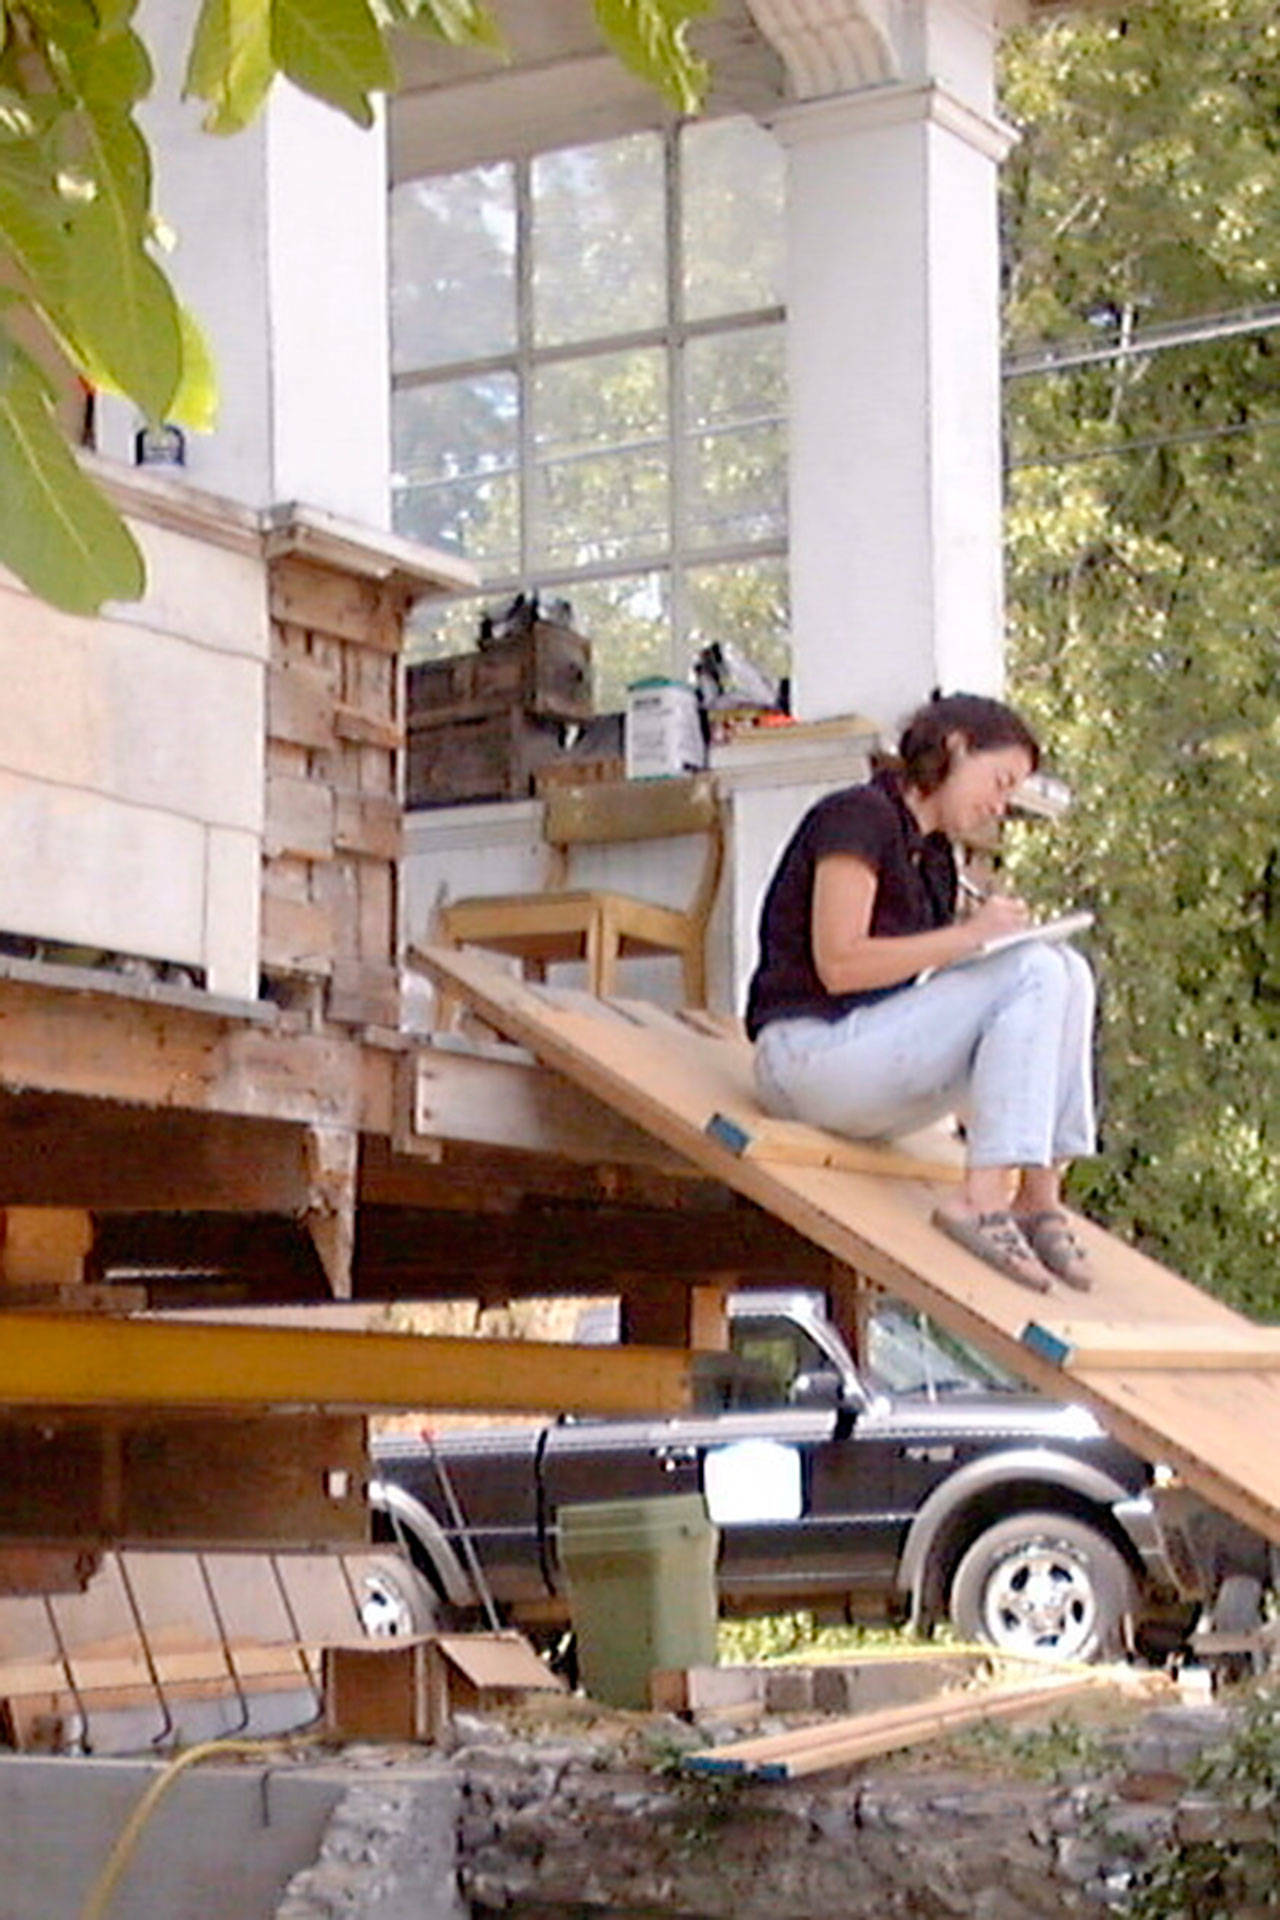 Erica Bauermeister, seen in August 2001 while renovating her house, will give a talk online tonight about her book, “House Lessons: Renovating a Life.” (Photo courtesy of Ben Bauermeister)